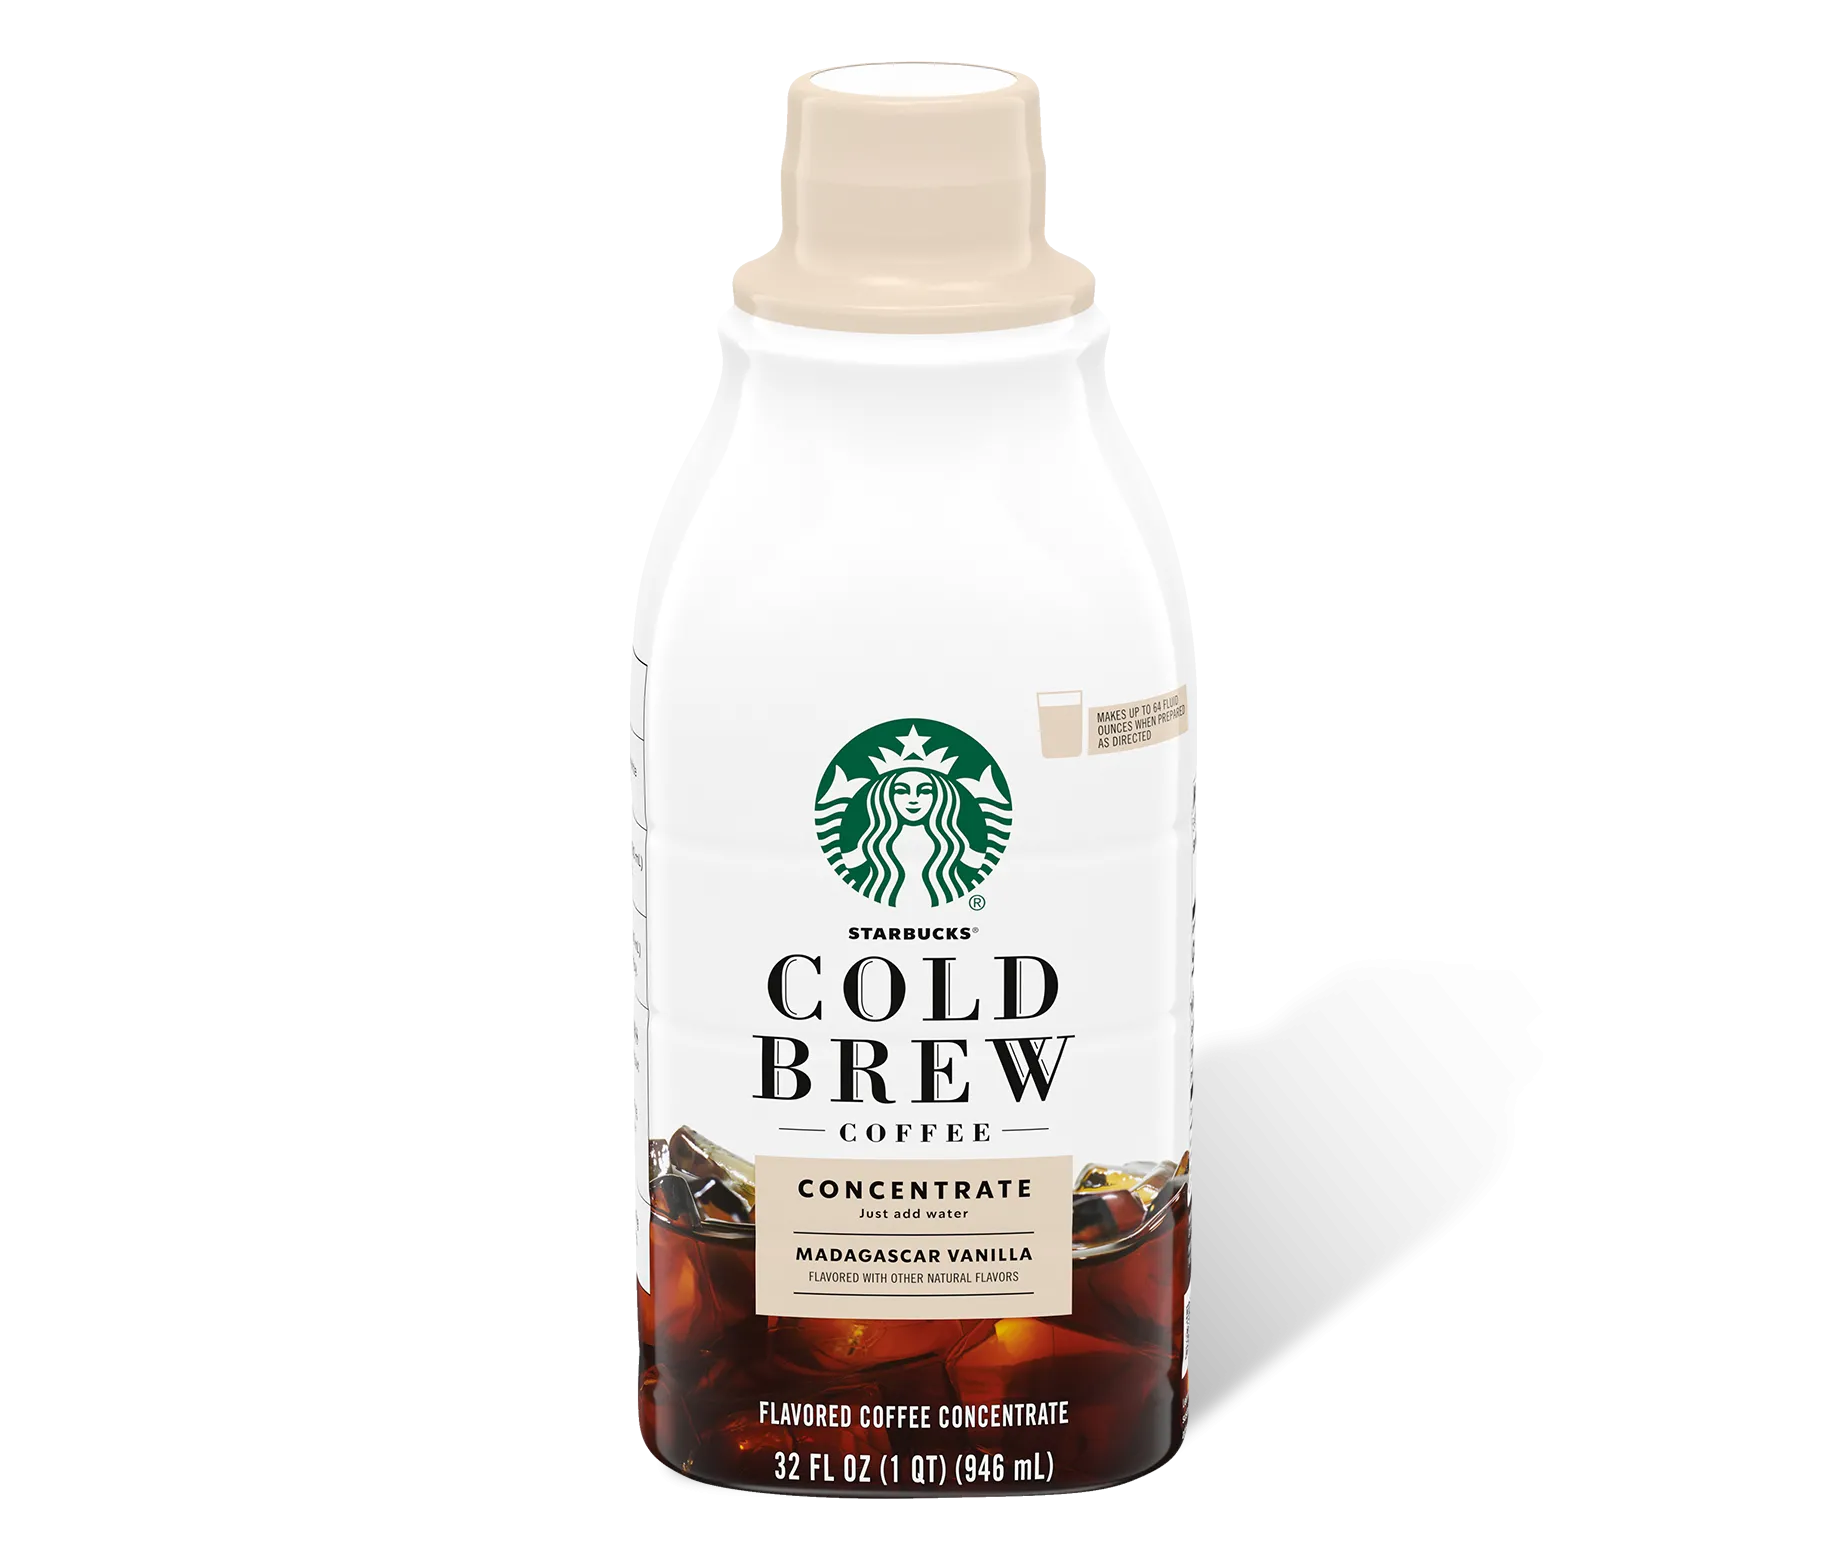 Generic Starbucks Cold Brew Coffee, Signature Black, Pitcher Packs, 8.6 Oz,  Pack of 3